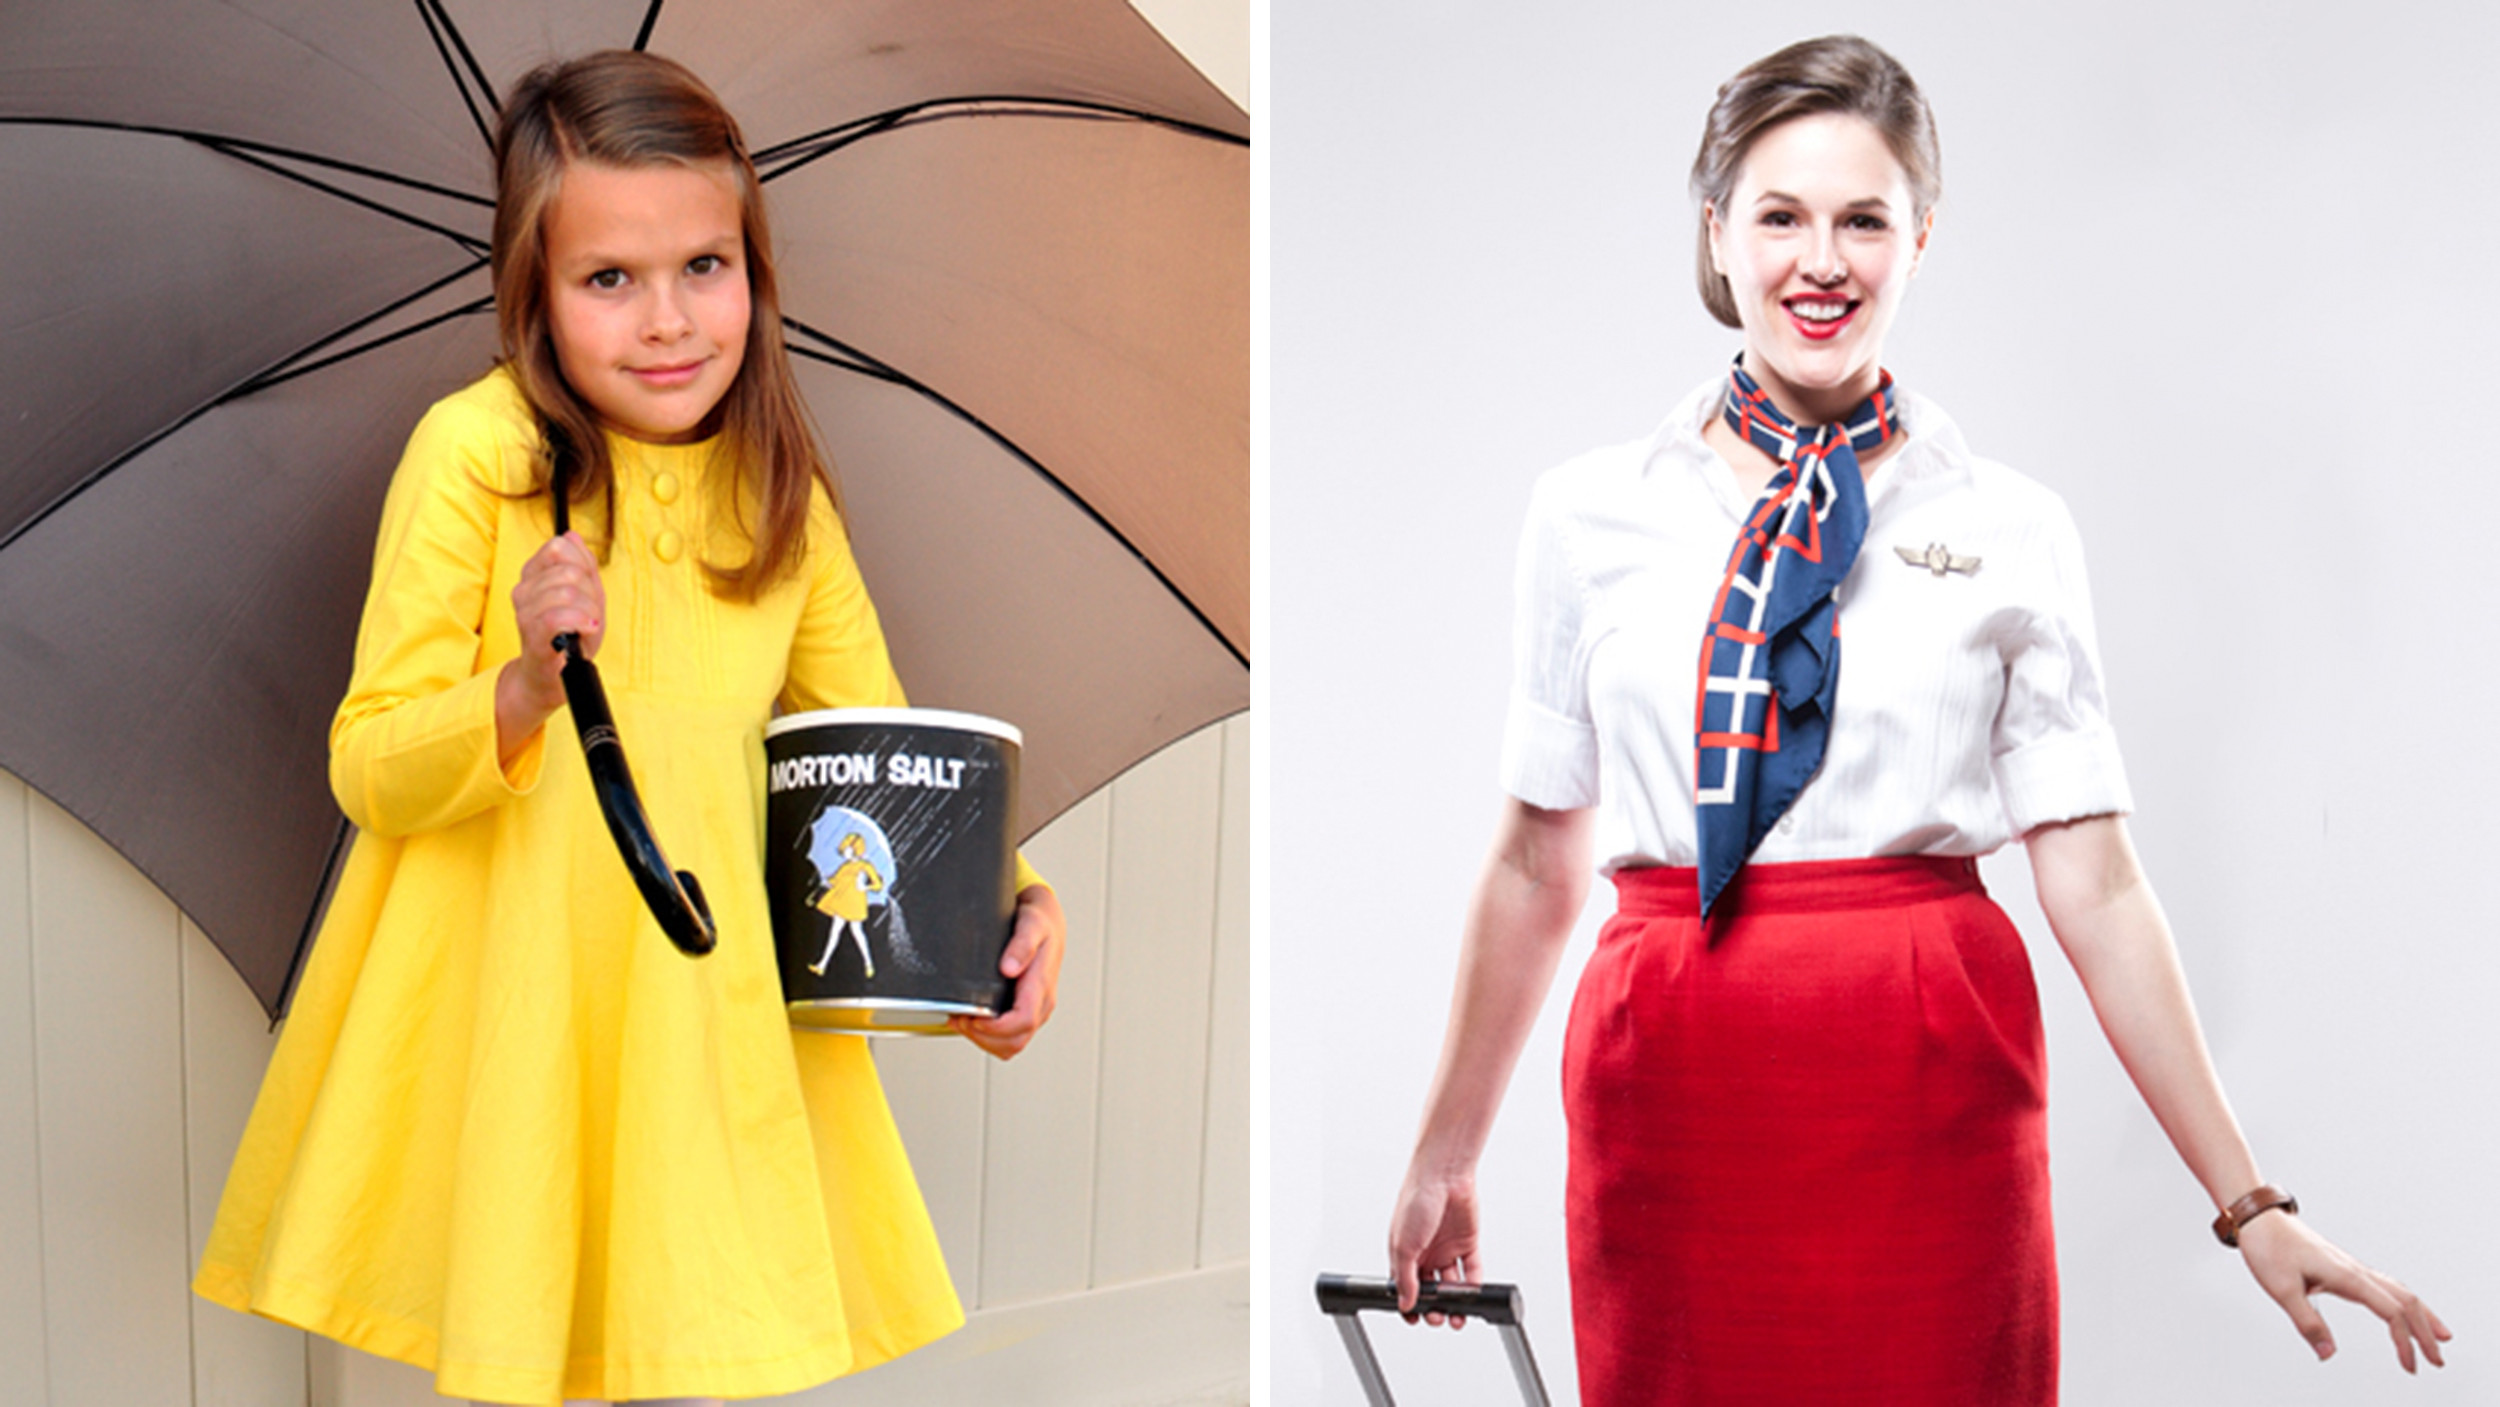 Last Minute DIY Halloween Costumes For Adults
 Last minute Halloween DIY costumes for busy parents